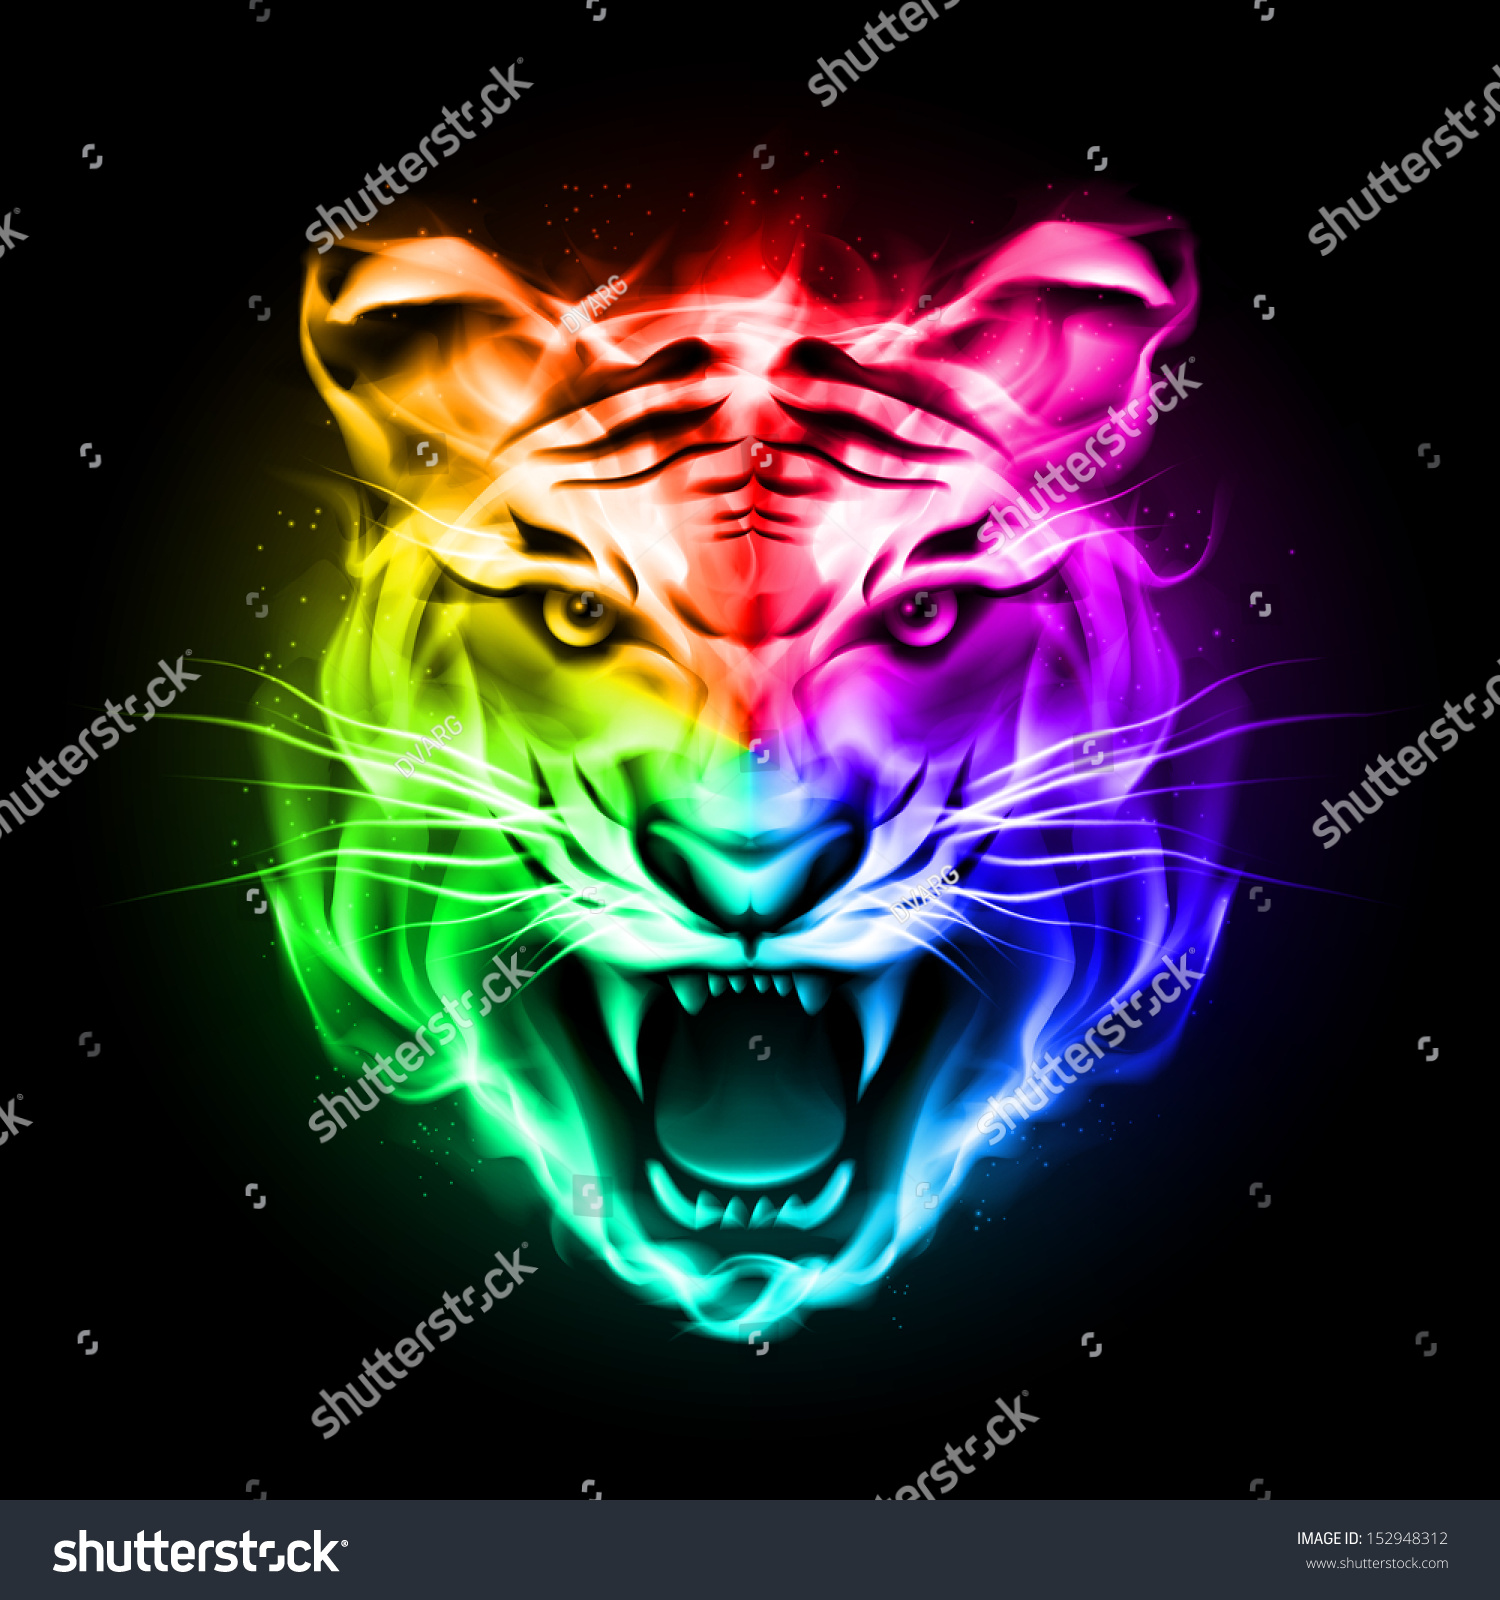 Head Of Tiger Blazing In Spectrum Fire On Black Background. Stock ...